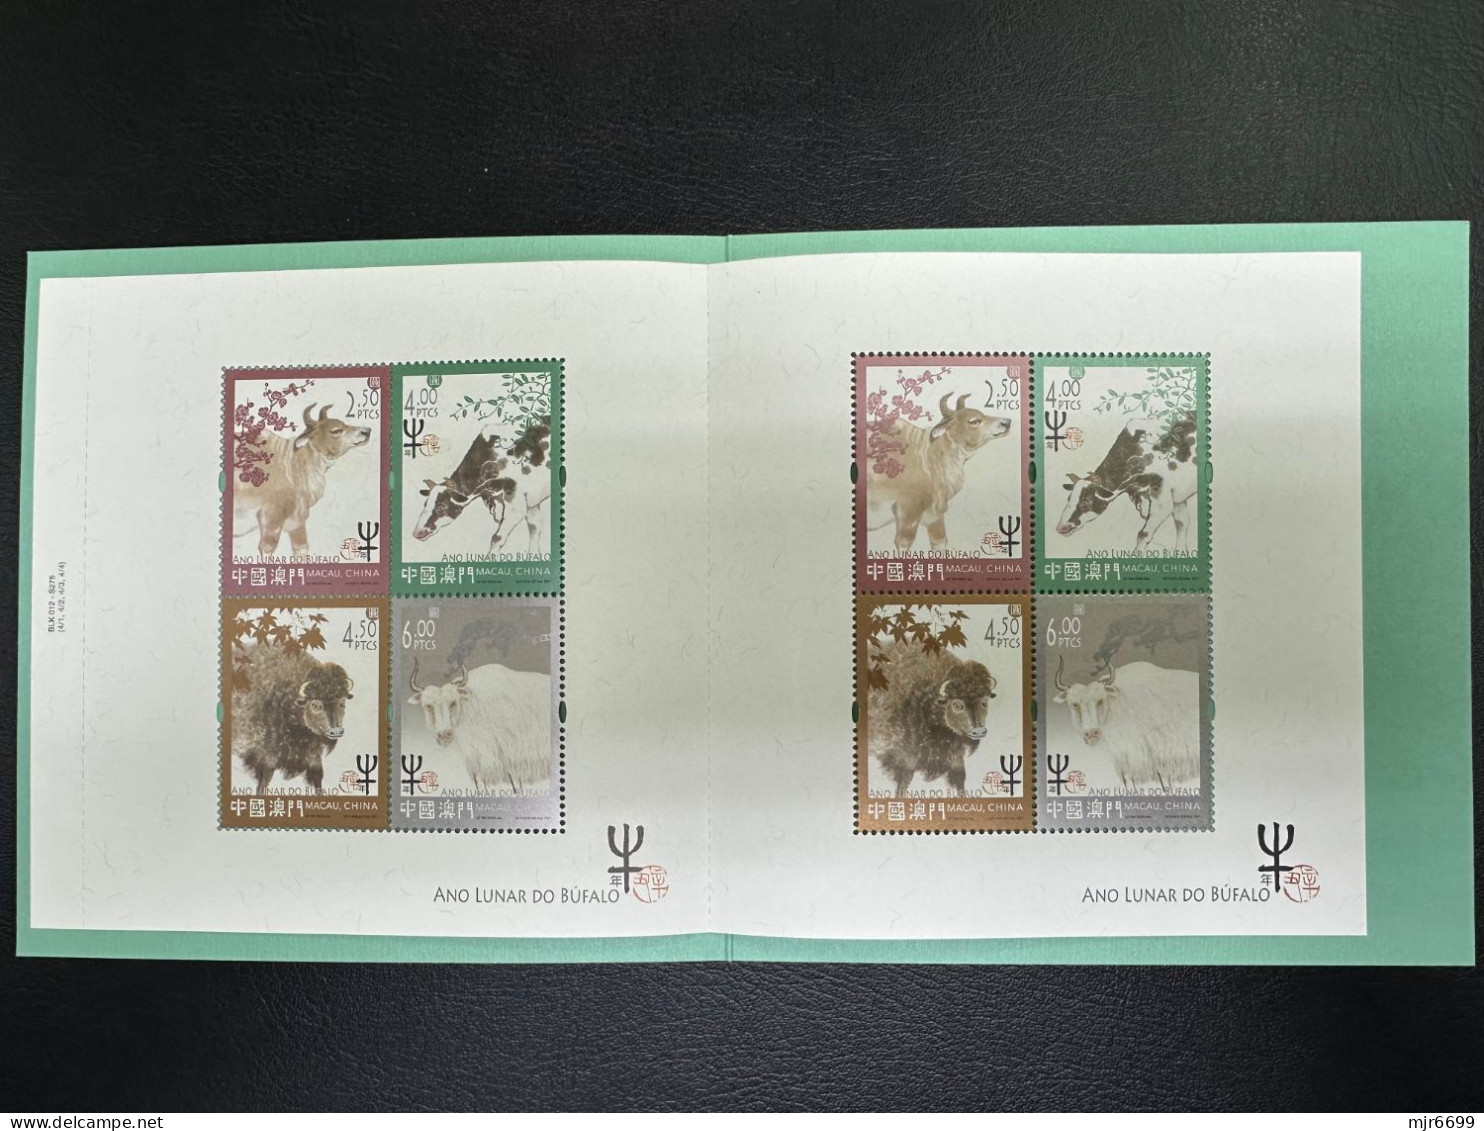 MACAU - 2021 YEAR OF THE OX BOOKLET - Carnets